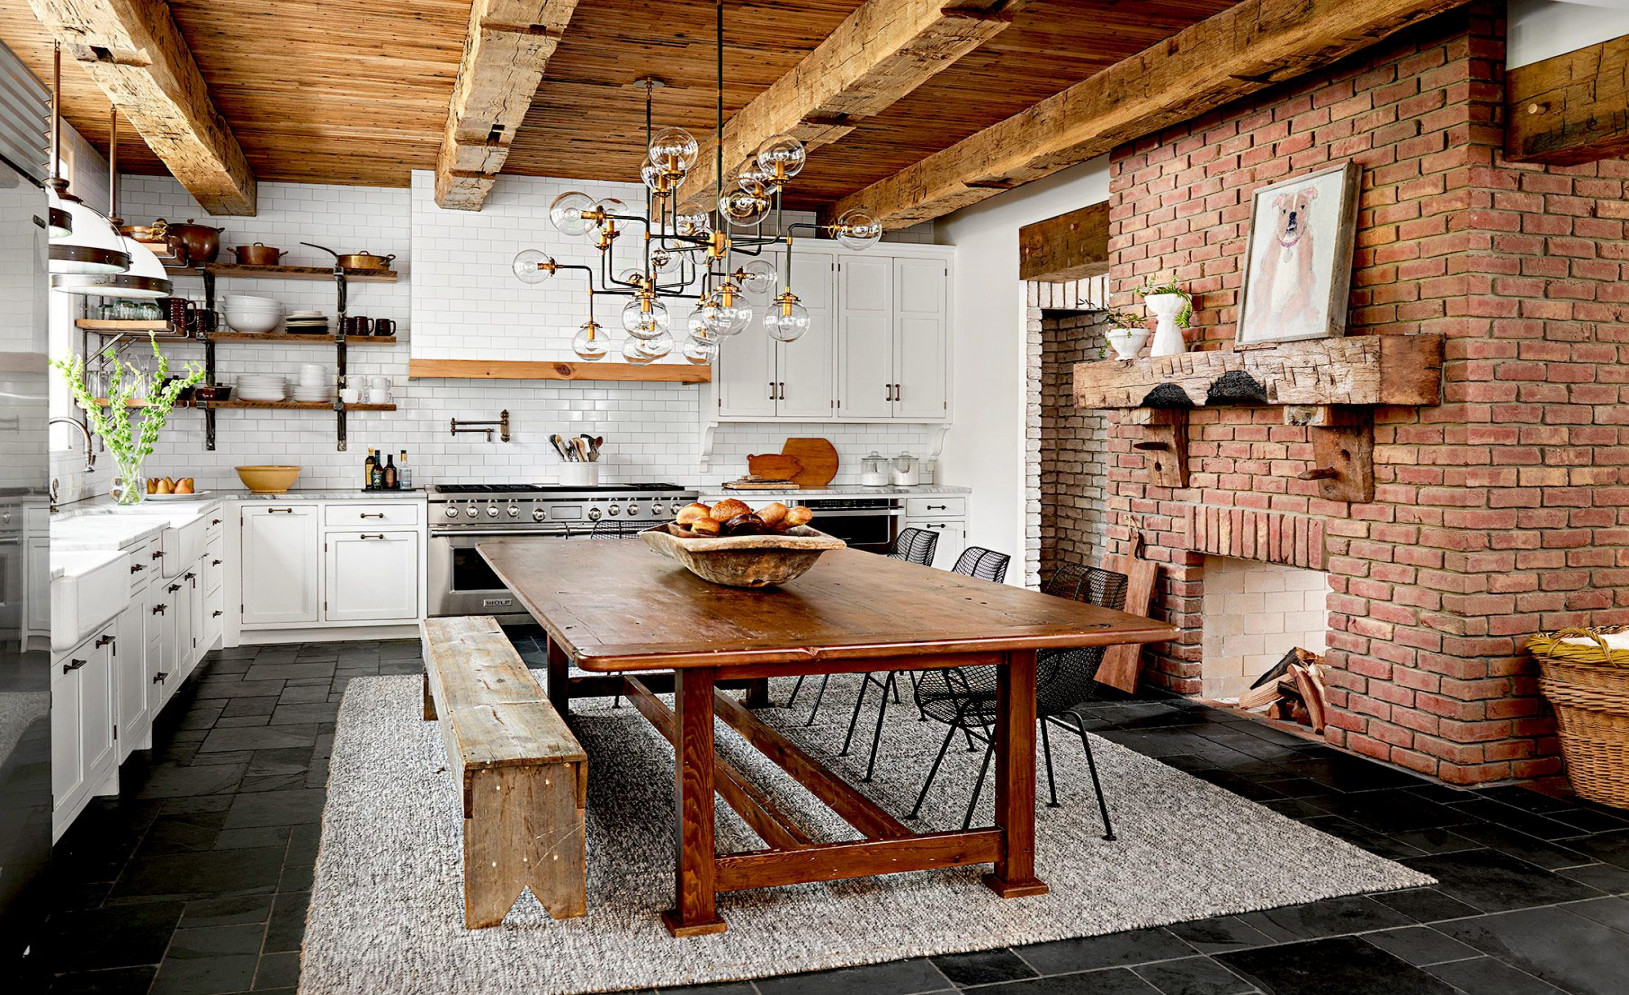 Farmhouse Kitchen Ideas to Add Rustic Charm in Modern Spaces